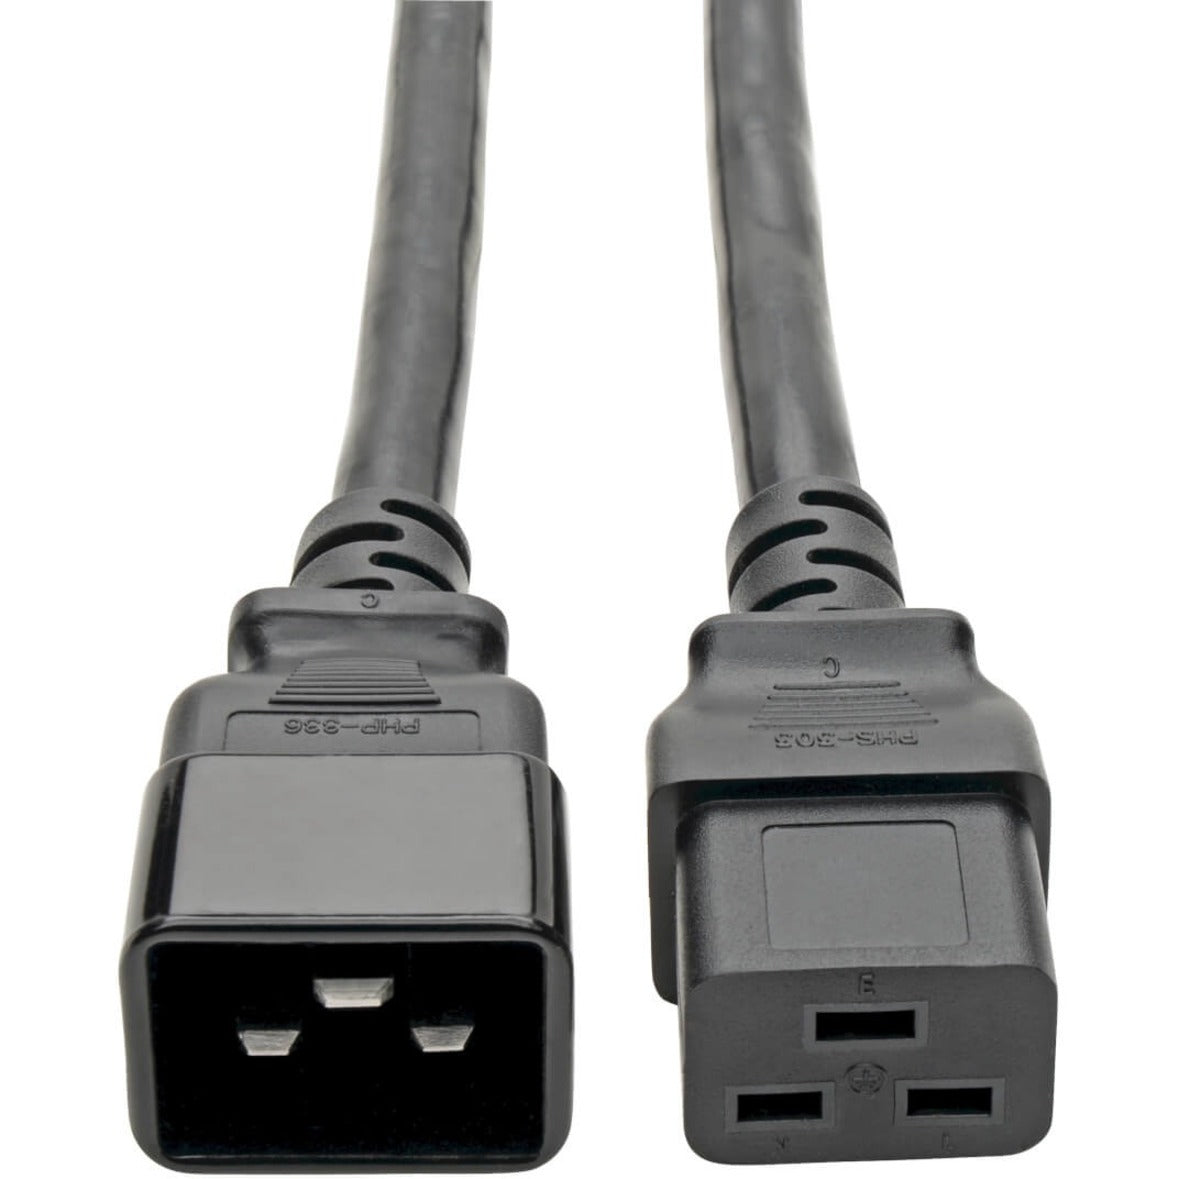 Tripp Lite by Eaton 6-PACK OF 2FT 12AWG HEAVY DUTY PWR CORDS (P036-002-6)